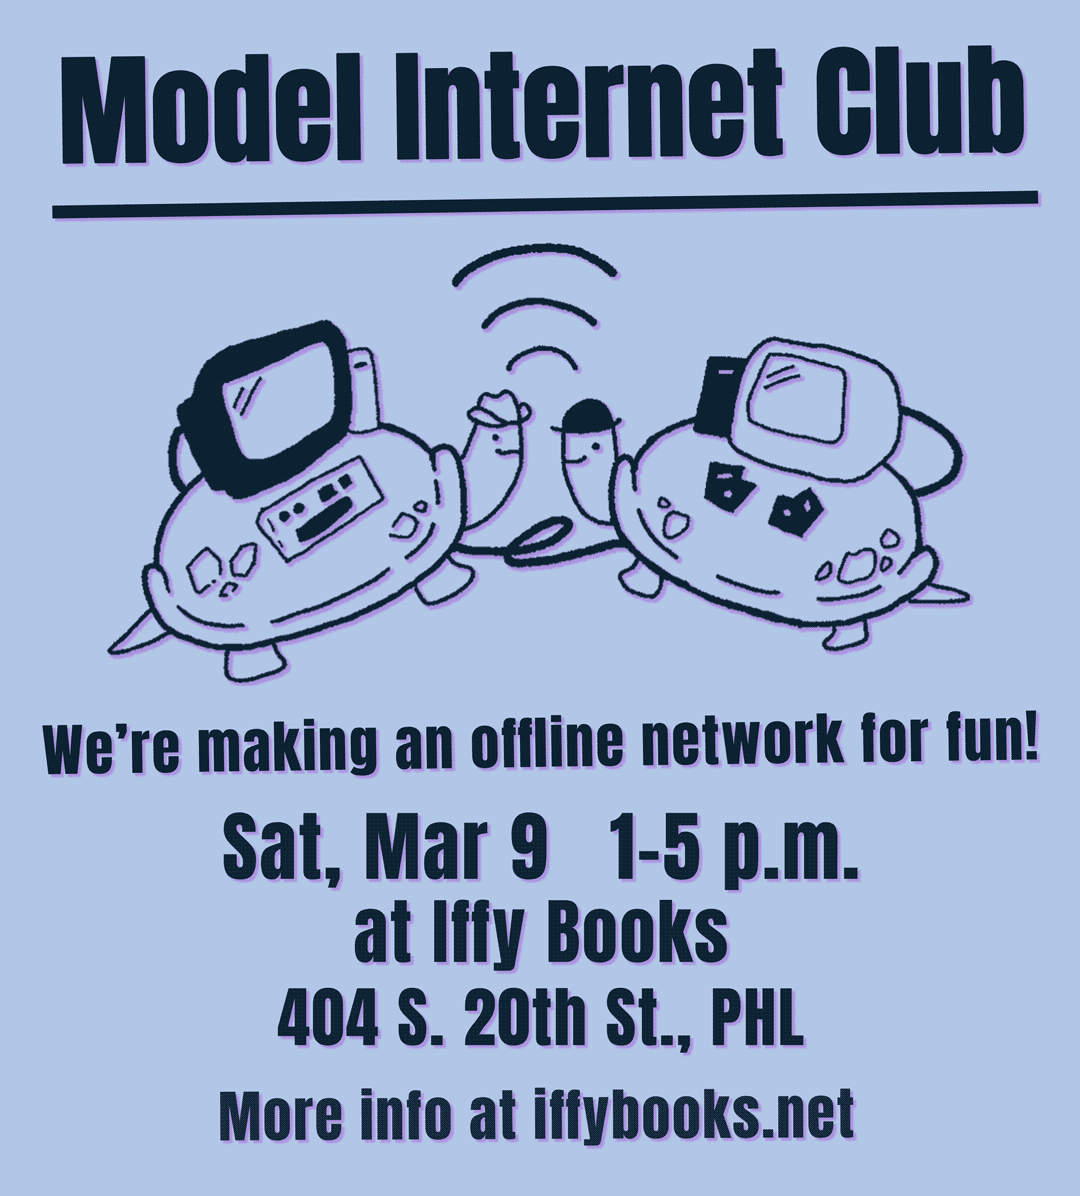 Flyer with a line drawing of two smiling turtles facing each other, each wearing a hat and carrying a computer on its shell. The text reads: Model Internet Club / We're making an offline network for fun! / Sat, Mar 9 1-5 p.m. at Iffy Books / 404 S. 20th St., PHL / More info at iffybooks.net